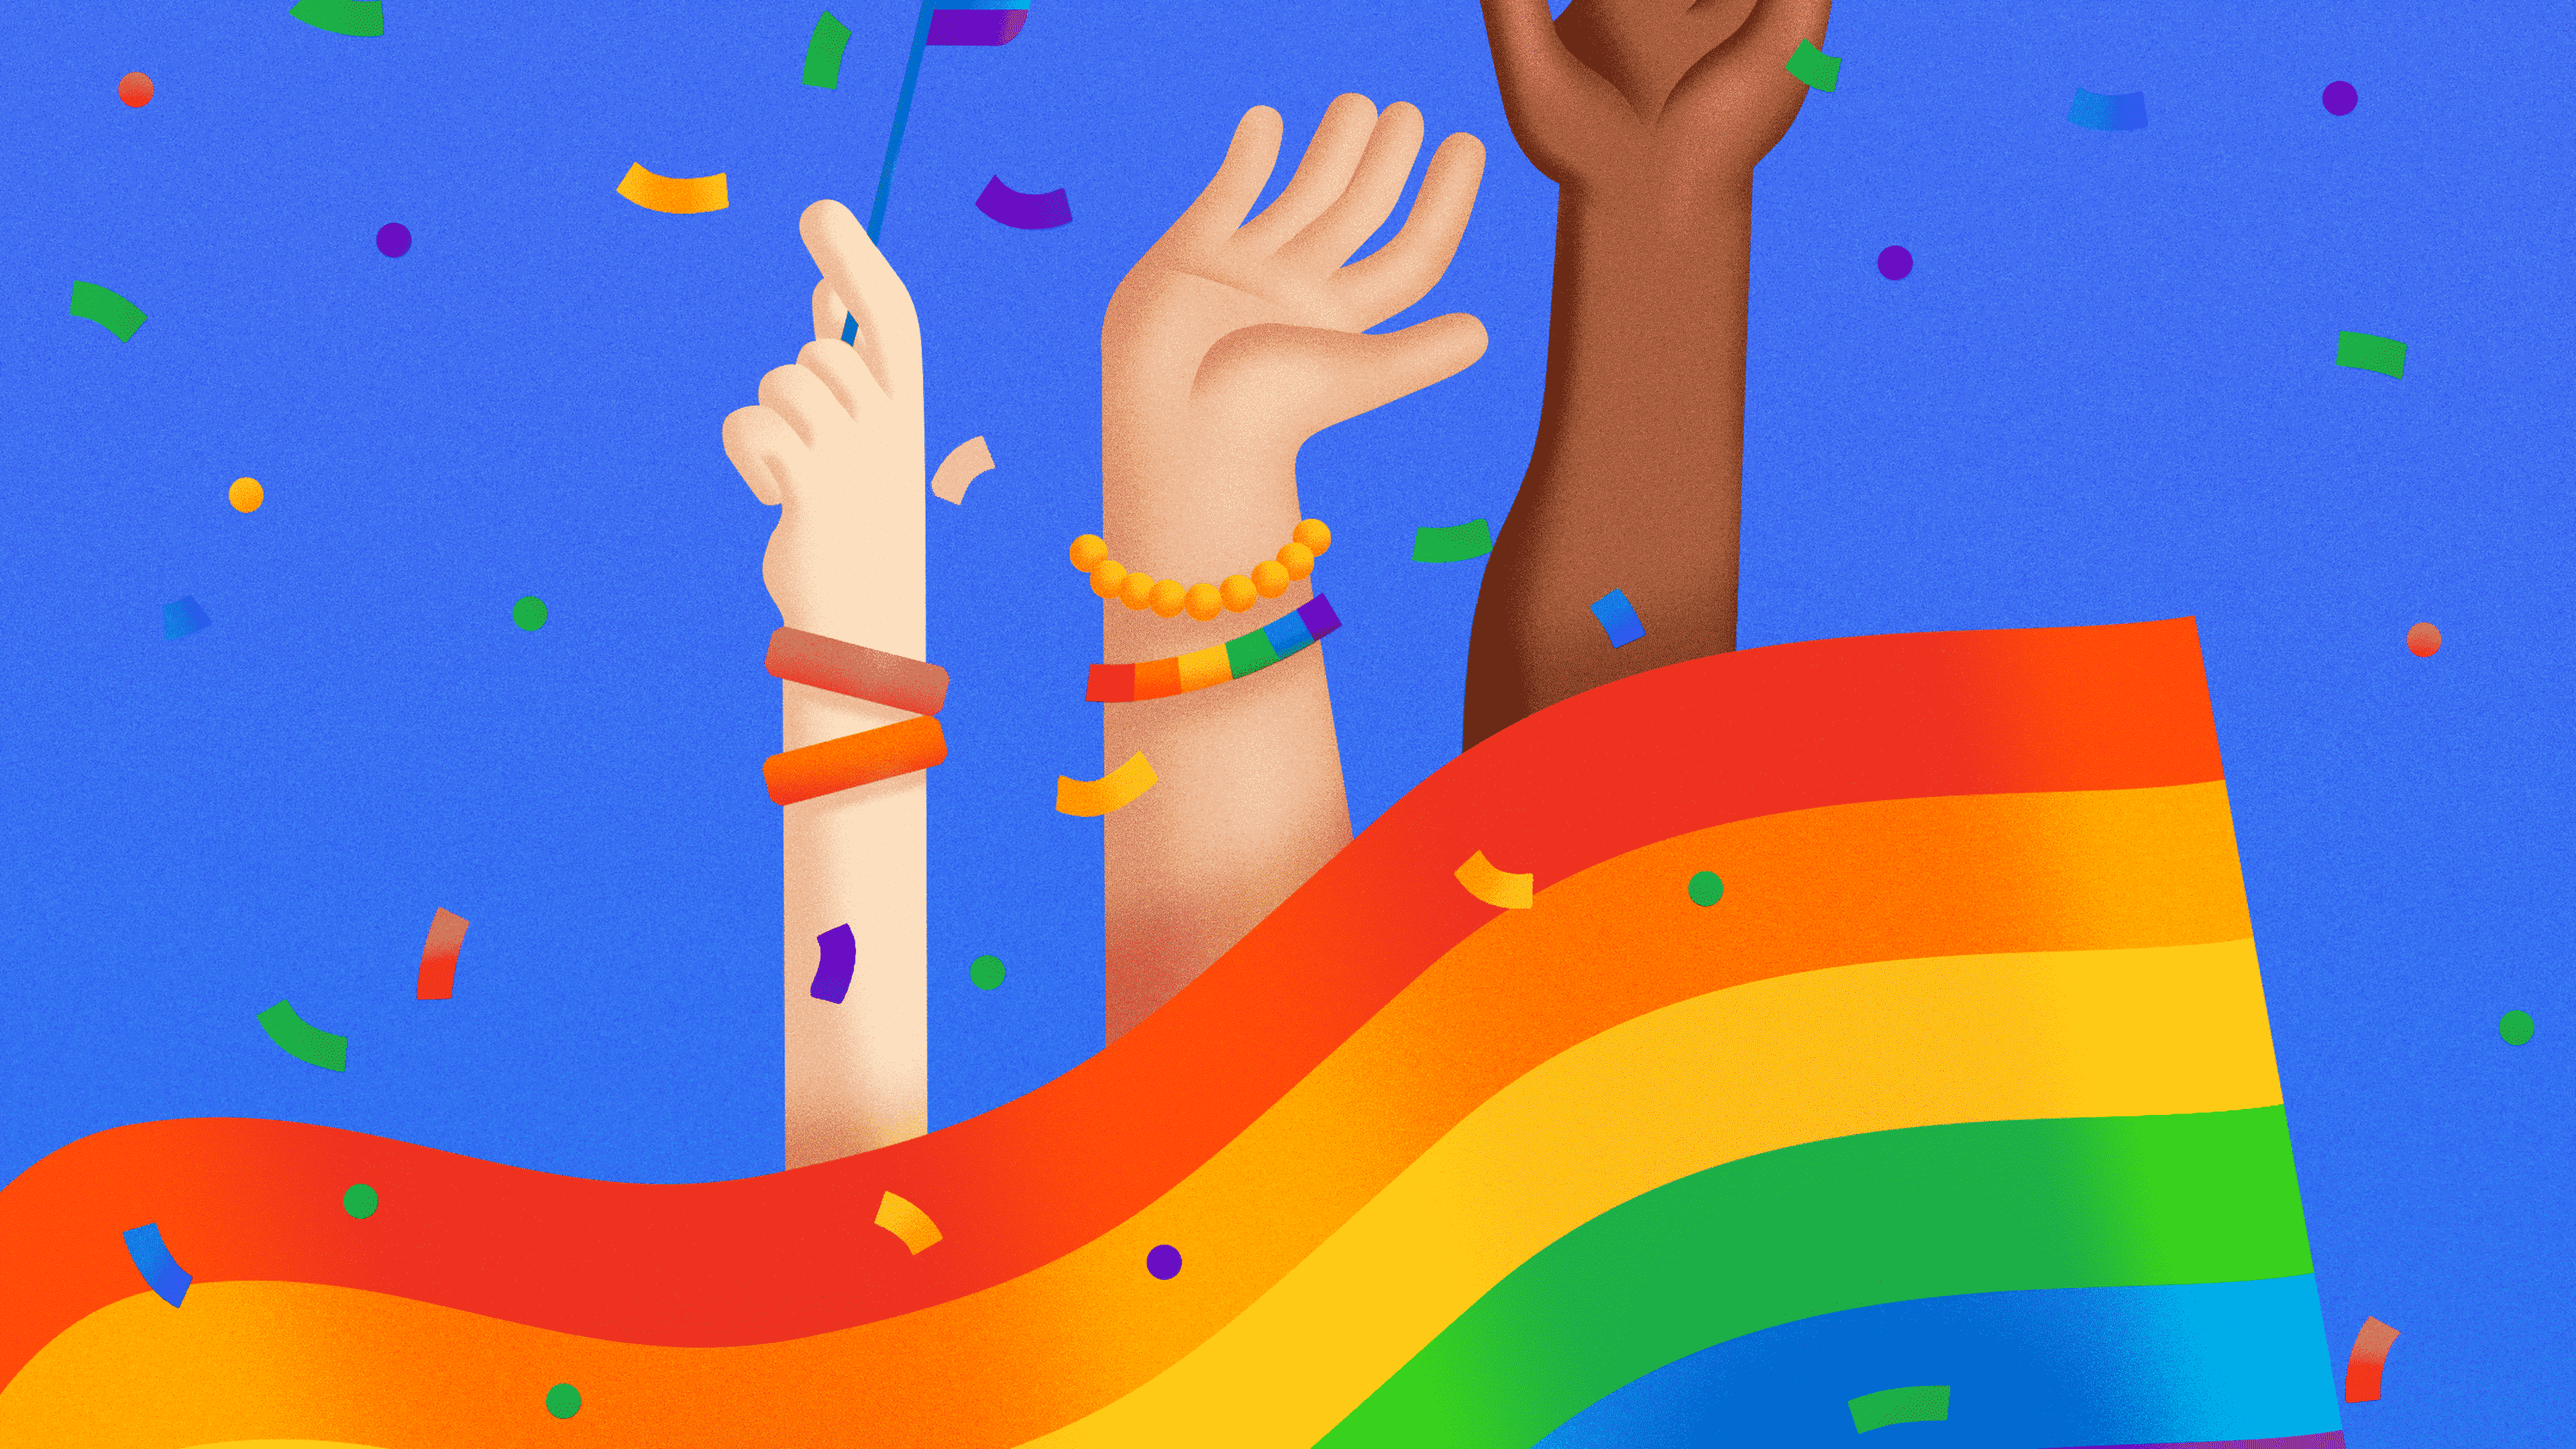 Google Brings Pride Wallpapers to Chrome New Tab Page.